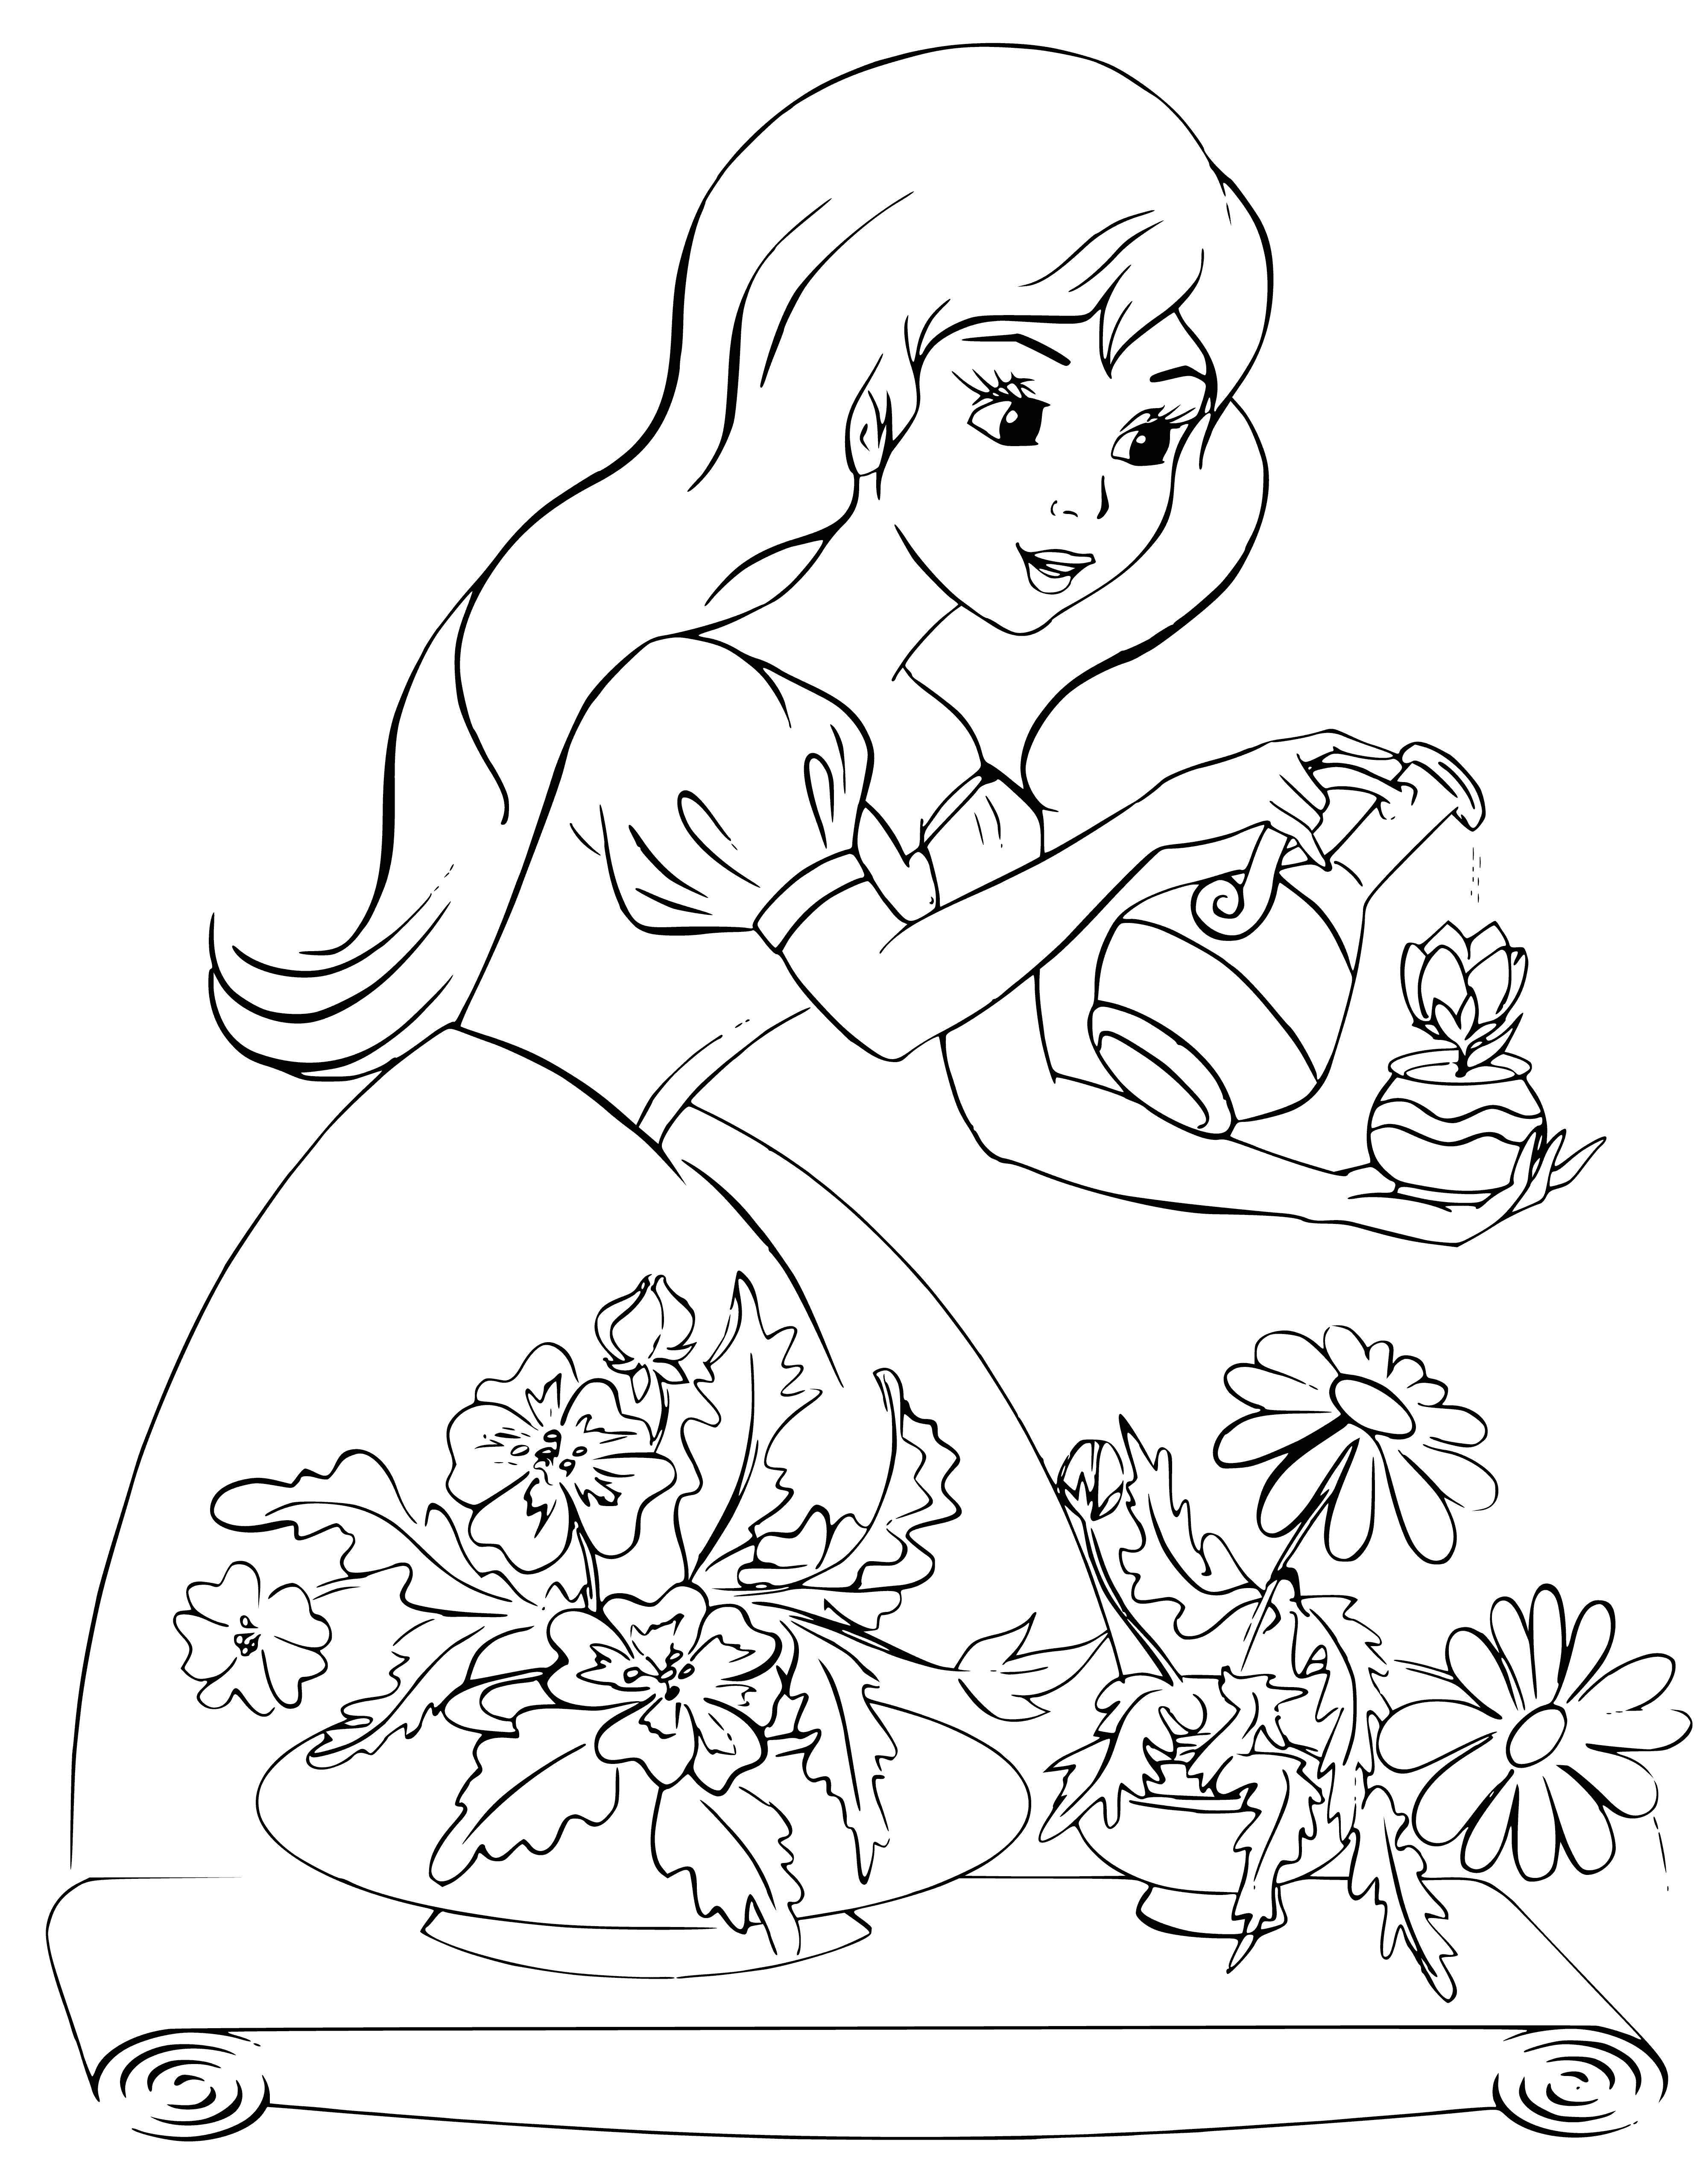 coloring page: Princess waters flowers in garden with watering can, enjoying the colors of the various blooms.